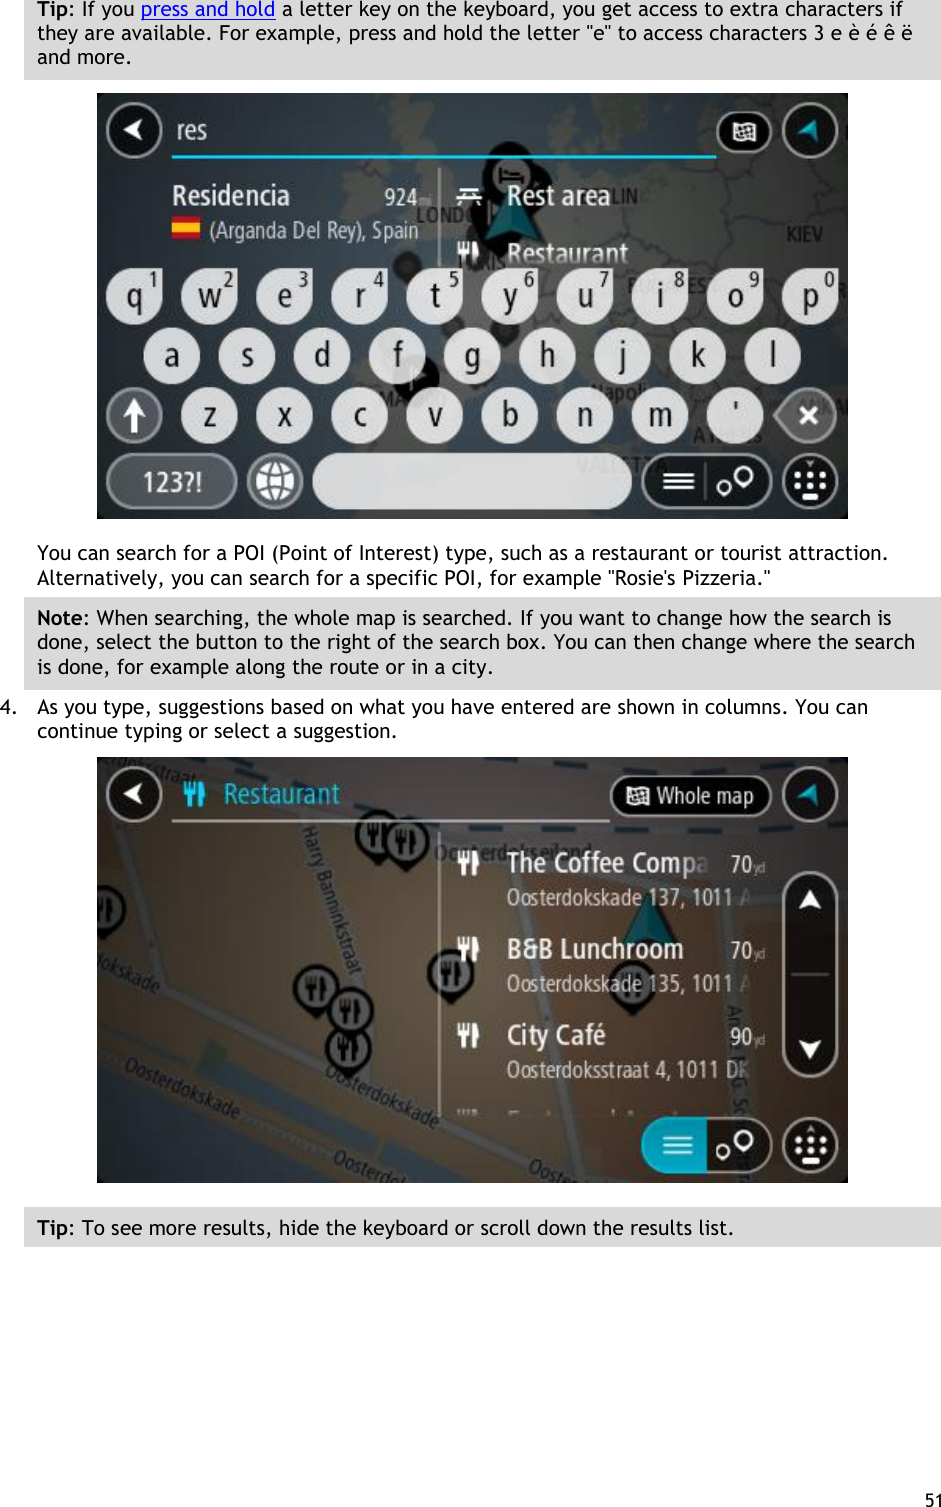  51  Tip: If you press and hold a letter key on the keyboard, you get access to extra characters if they are available. For example, press and hold the letter &quot;e&quot; to access characters 3 e è é ê ë and more.  You can search for a POI (Point of Interest) type, such as a restaurant or tourist attraction. Alternatively, you can search for a specific POI, for example &quot;Rosie&apos;s Pizzeria.&quot; Note: When searching, the whole map is searched. If you want to change how the search is done, select the button to the right of the search box. You can then change where the search is done, for example along the route or in a city. 4. As you type, suggestions based on what you have entered are shown in columns. You can continue typing or select a suggestion.  Tip: To see more results, hide the keyboard or scroll down the results list. 